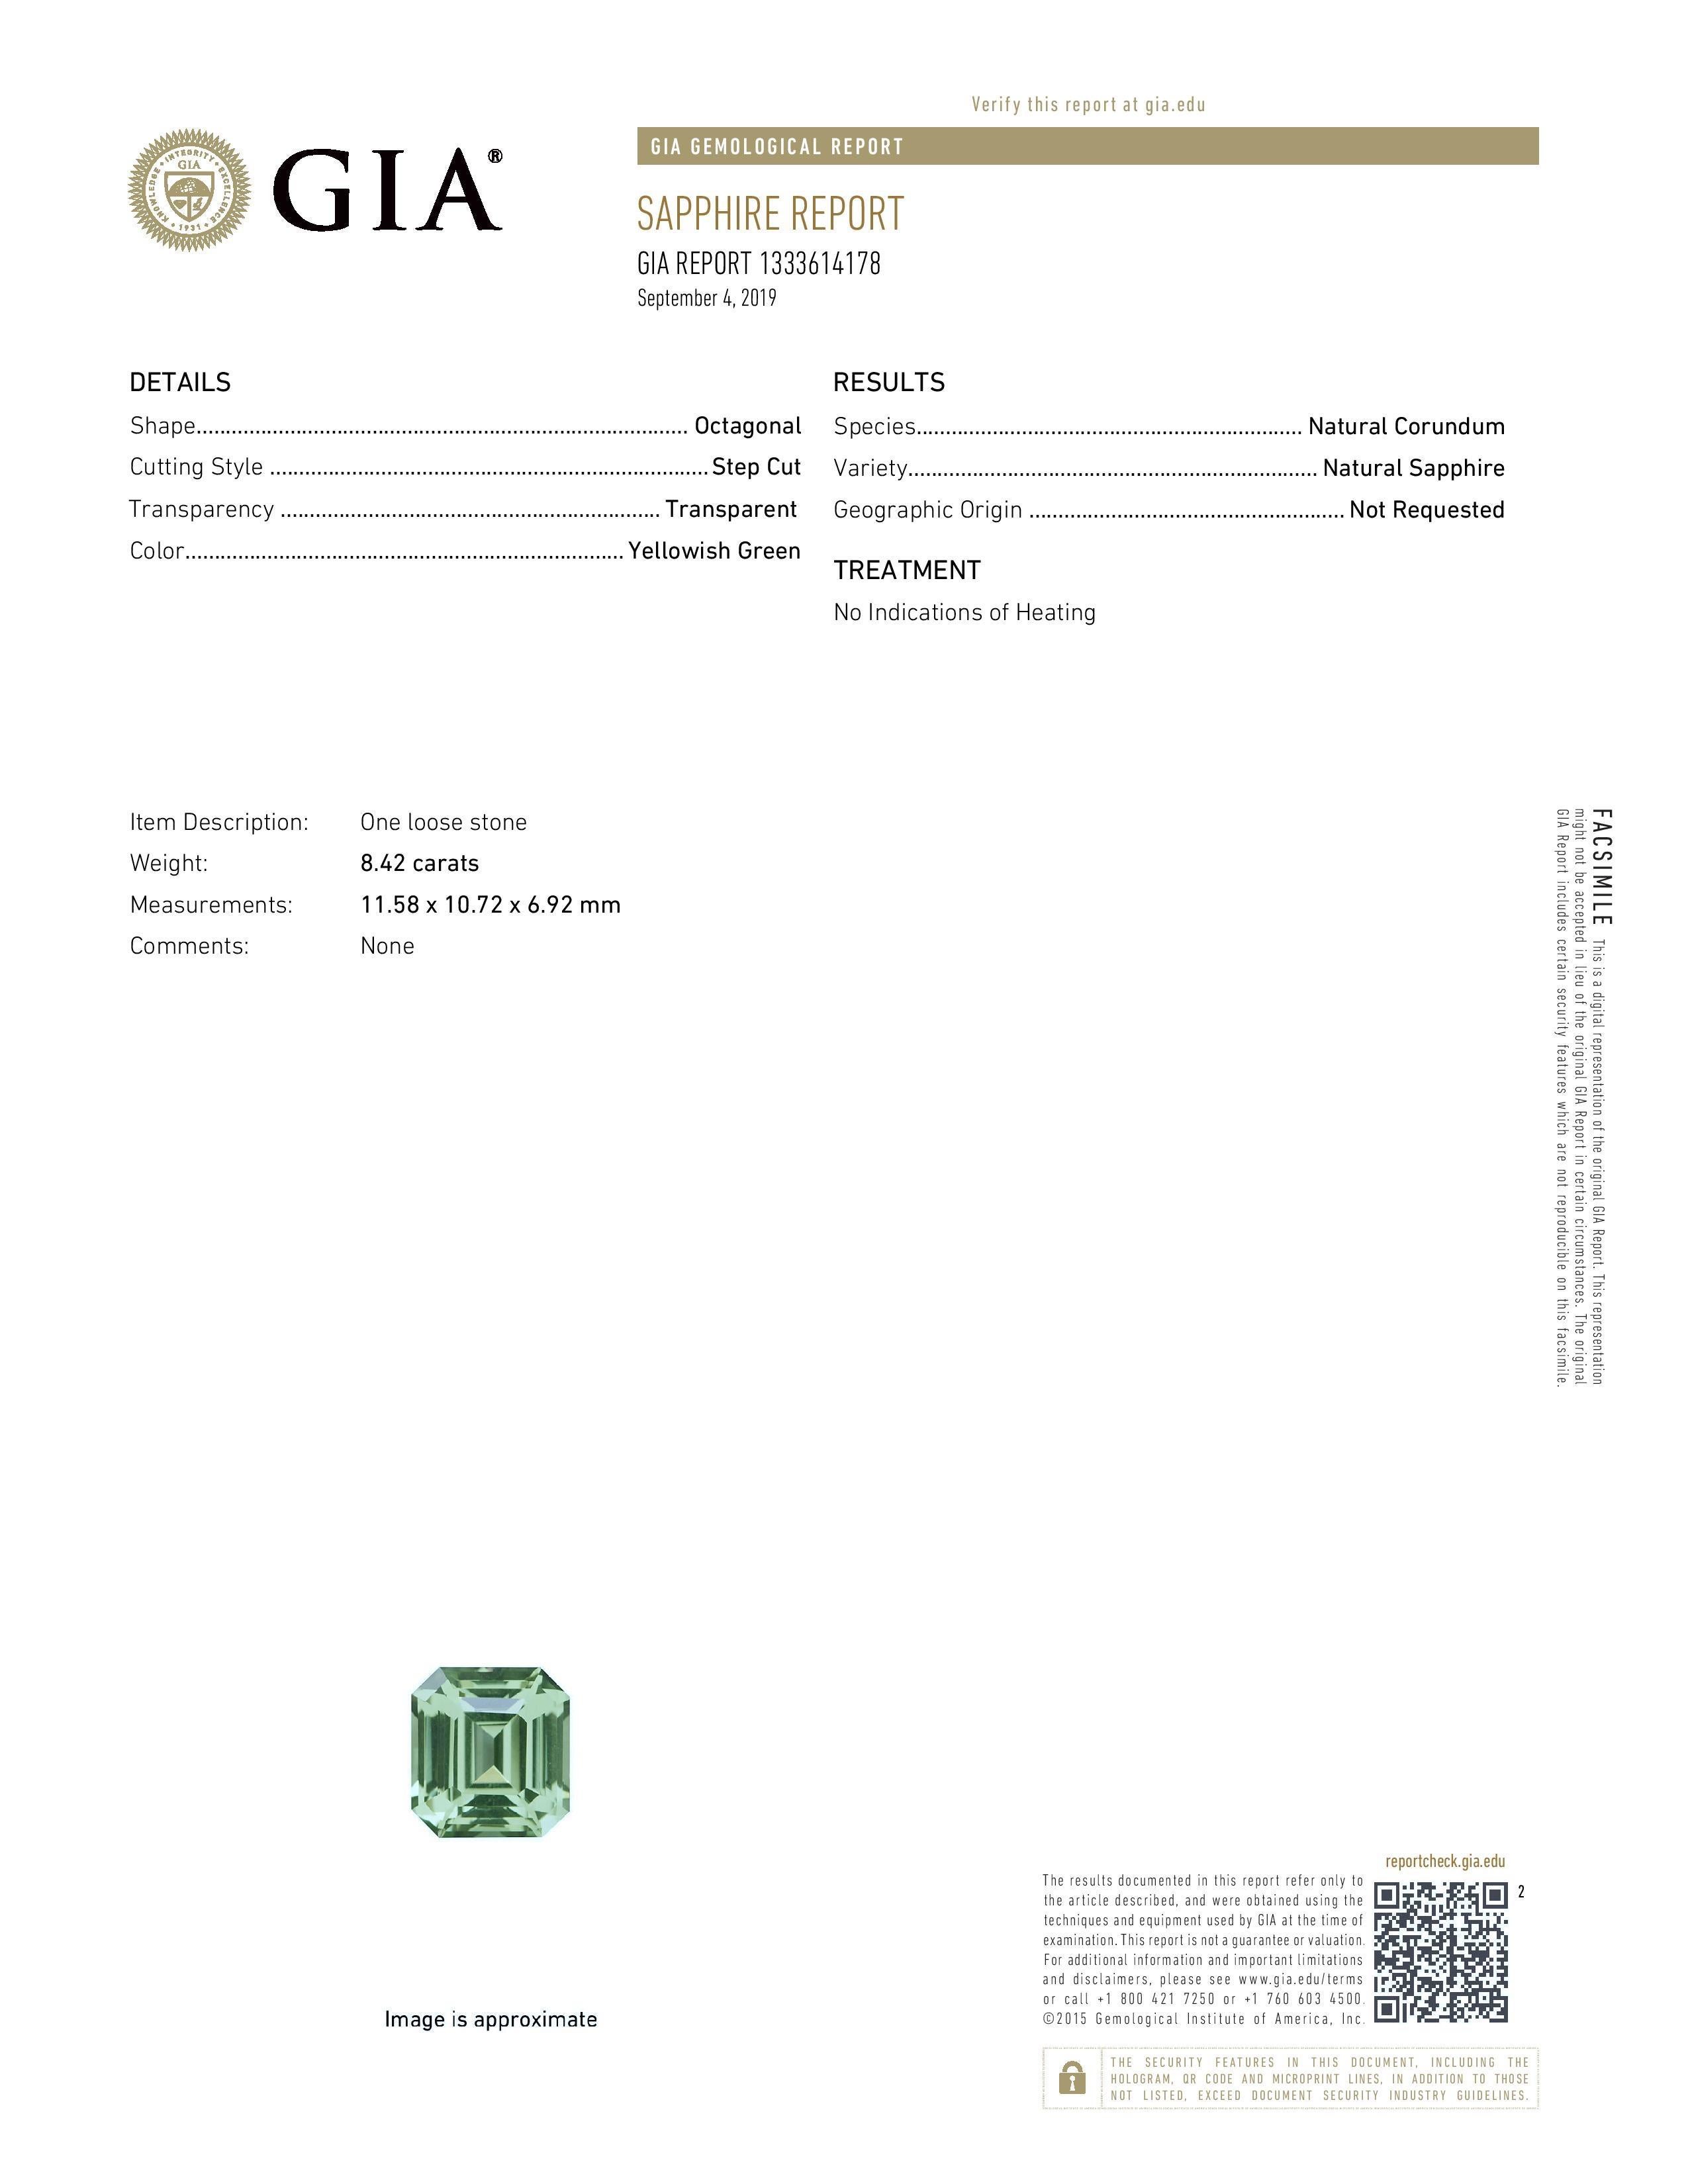 No heat G.I.A certified 8.42 carat Green Sapphire emerald cut. This superb, collection quality gem, is offered loose and would make an exceptional unisex custom made jewelry creation. (Ring, necklace, pendant, bracelet or cuff).
Returns are accepted